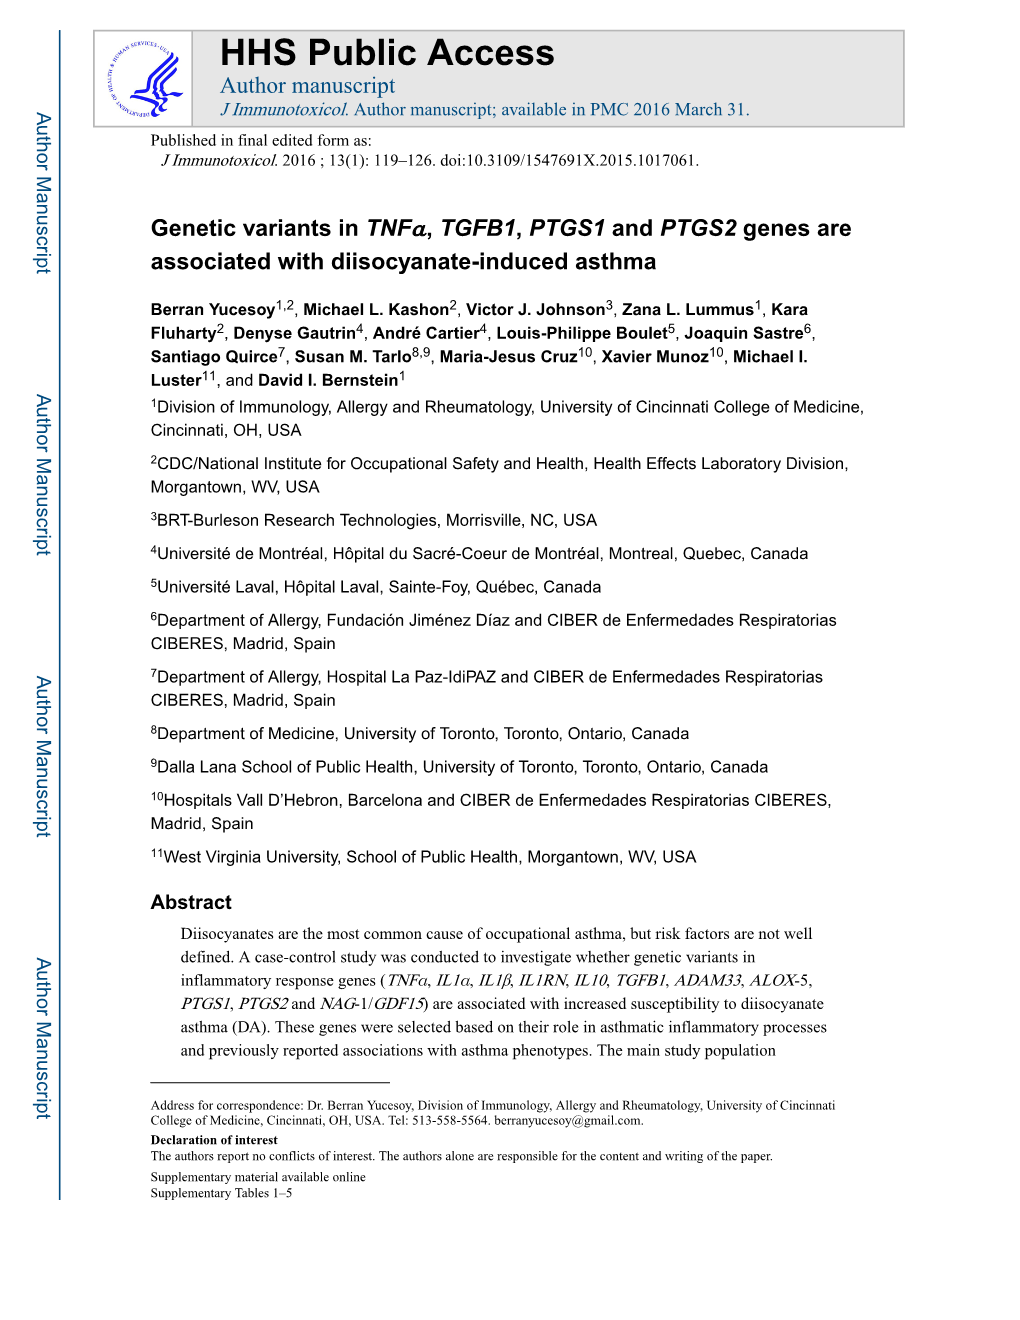 Genetic Variants in Tnfα, TGFB1, PTGS1 and PTGS2 Genes Are Associated with Diisocyanate-Induced Asthma